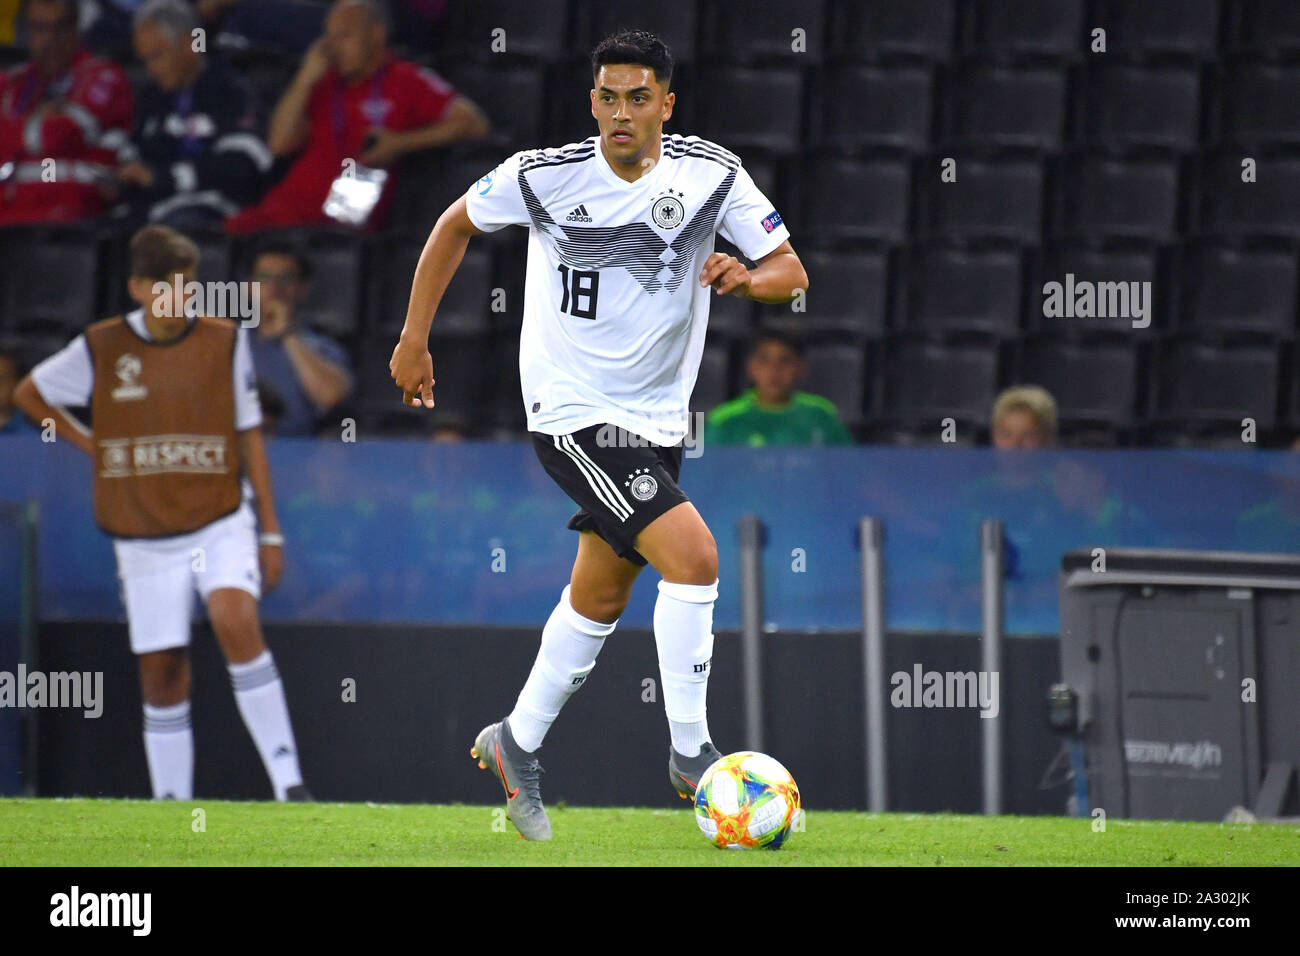 Nadiem Amiri (Bayer 04 Leverkusen) is in the squad for the first time, archival photo; Nadiem AMIRI (GER), Action, Single Action, Frame, Cut Out, Full Body, Whole Figure. Germany (GER) -Daenemark (DEN) 3-1, on 17.06.2019 Stadio Friuli Udine. Football U-21, UEFA Under21 European Championship in Italy/SanMarino from 16.-30.06.2019. | Usage worldwide Stock Photo